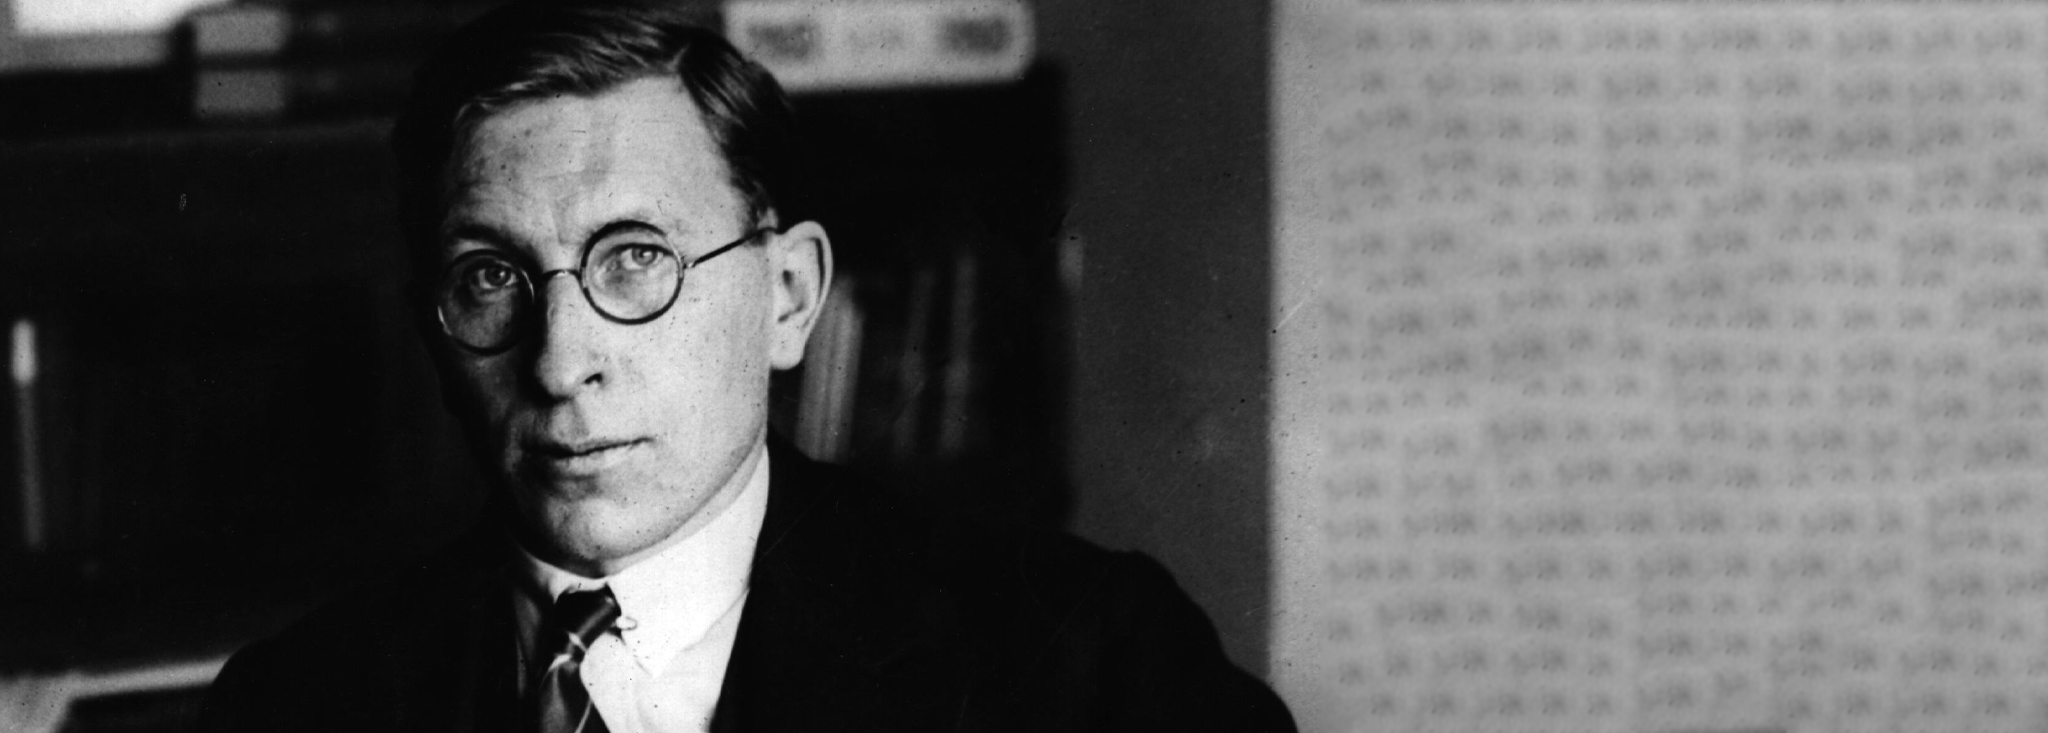 Banting—The Man, the Myth, the Legend